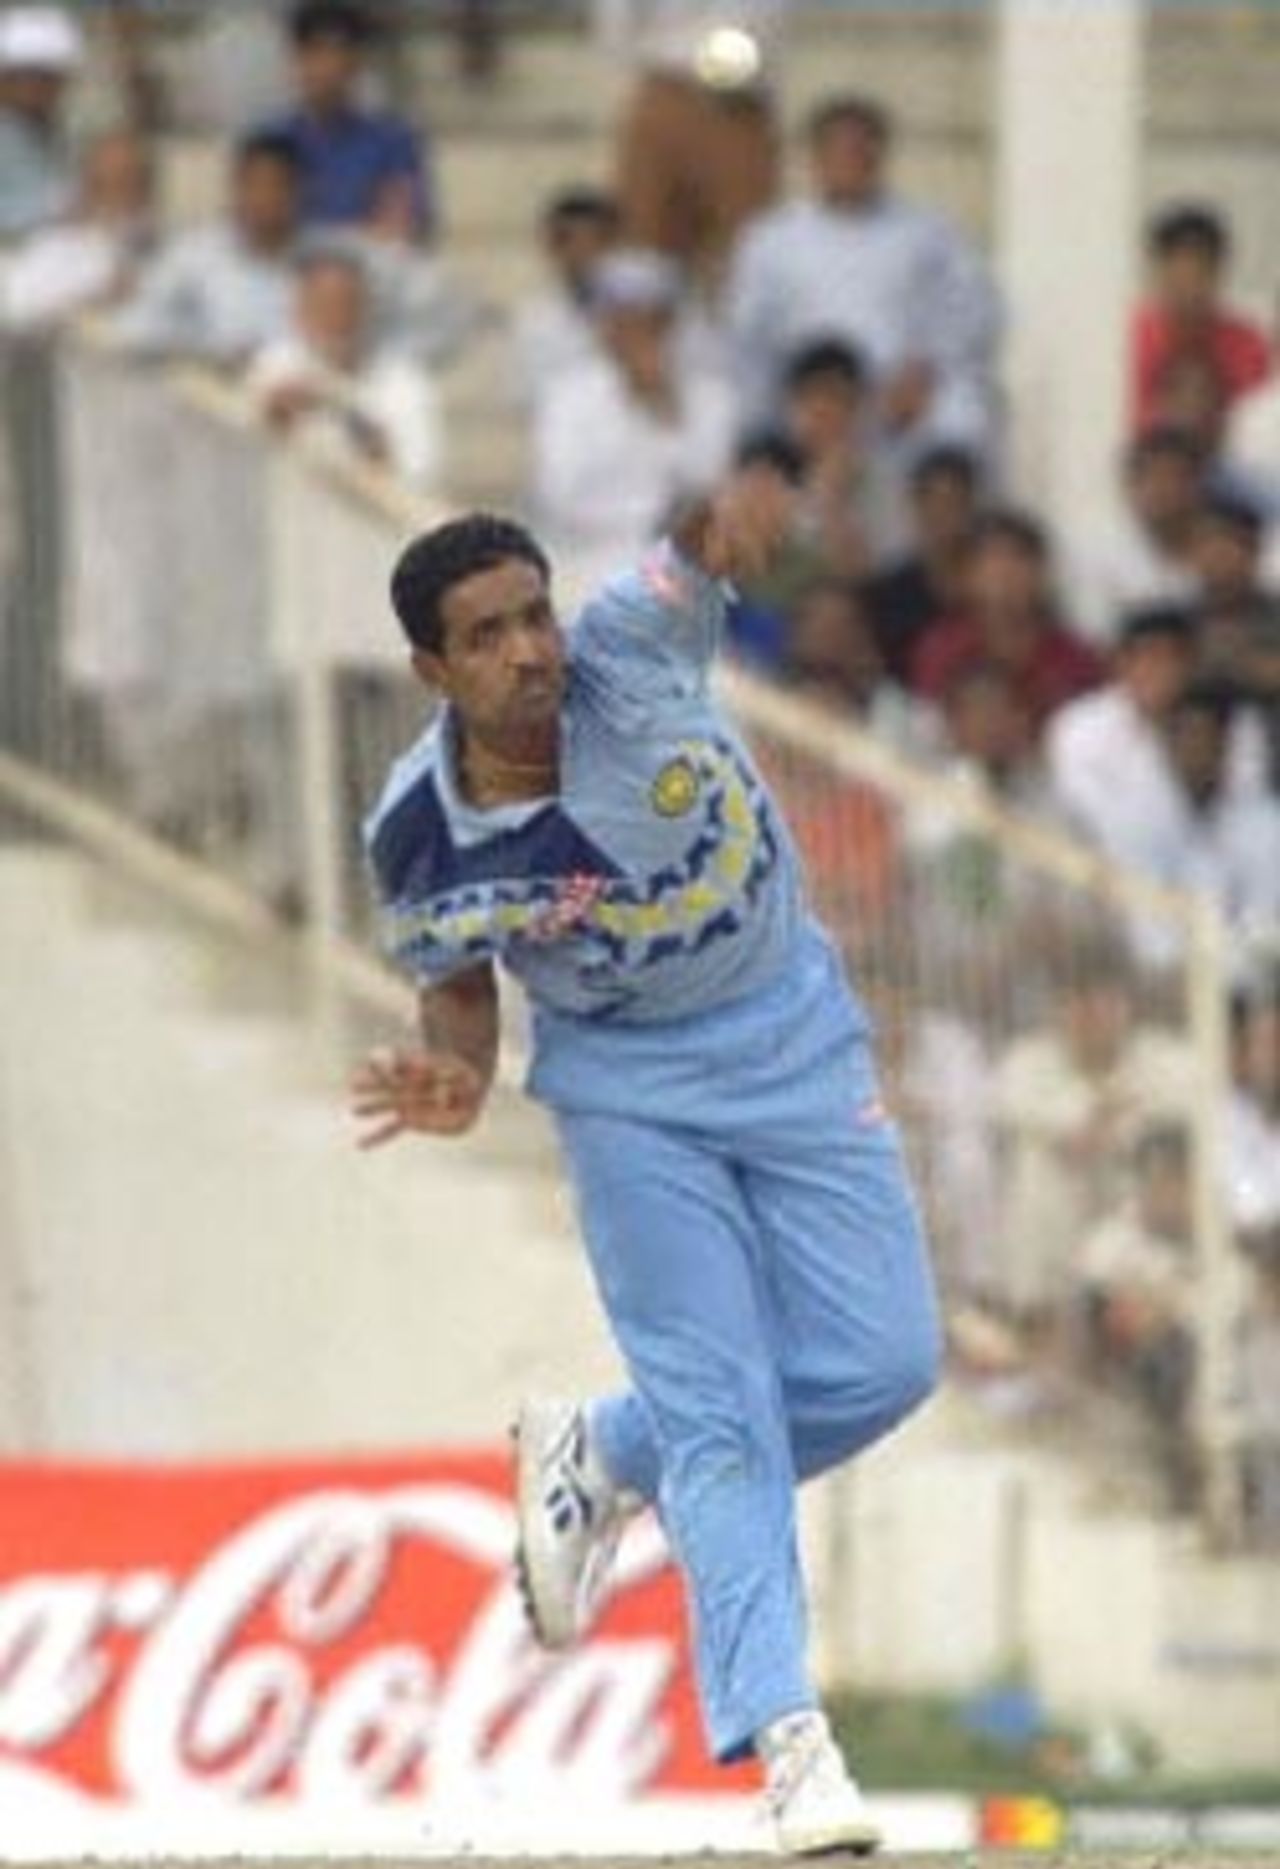 Indian bowler Sunil Joshi delivers the ball to Pakistani batsman Yusuf Youhana during their Champions Cup International game at the Sharjah cricket stadium 26 March 2000.